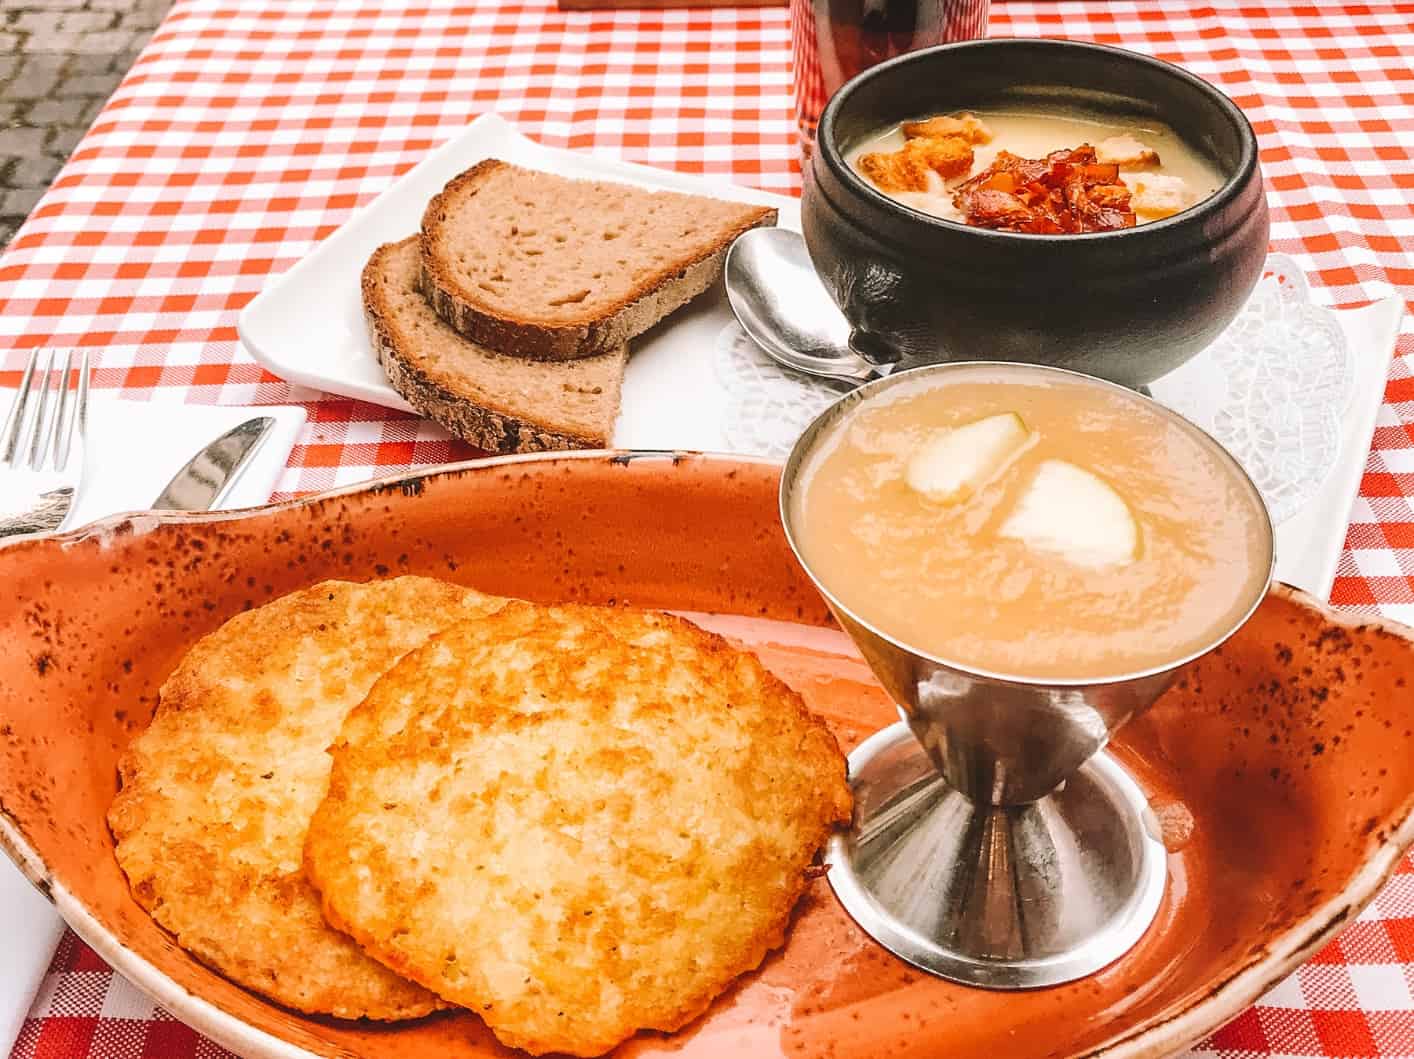 A mid-day snack of potato pancakes and potato soup at the Ratskeller Munchen in Marienplatz